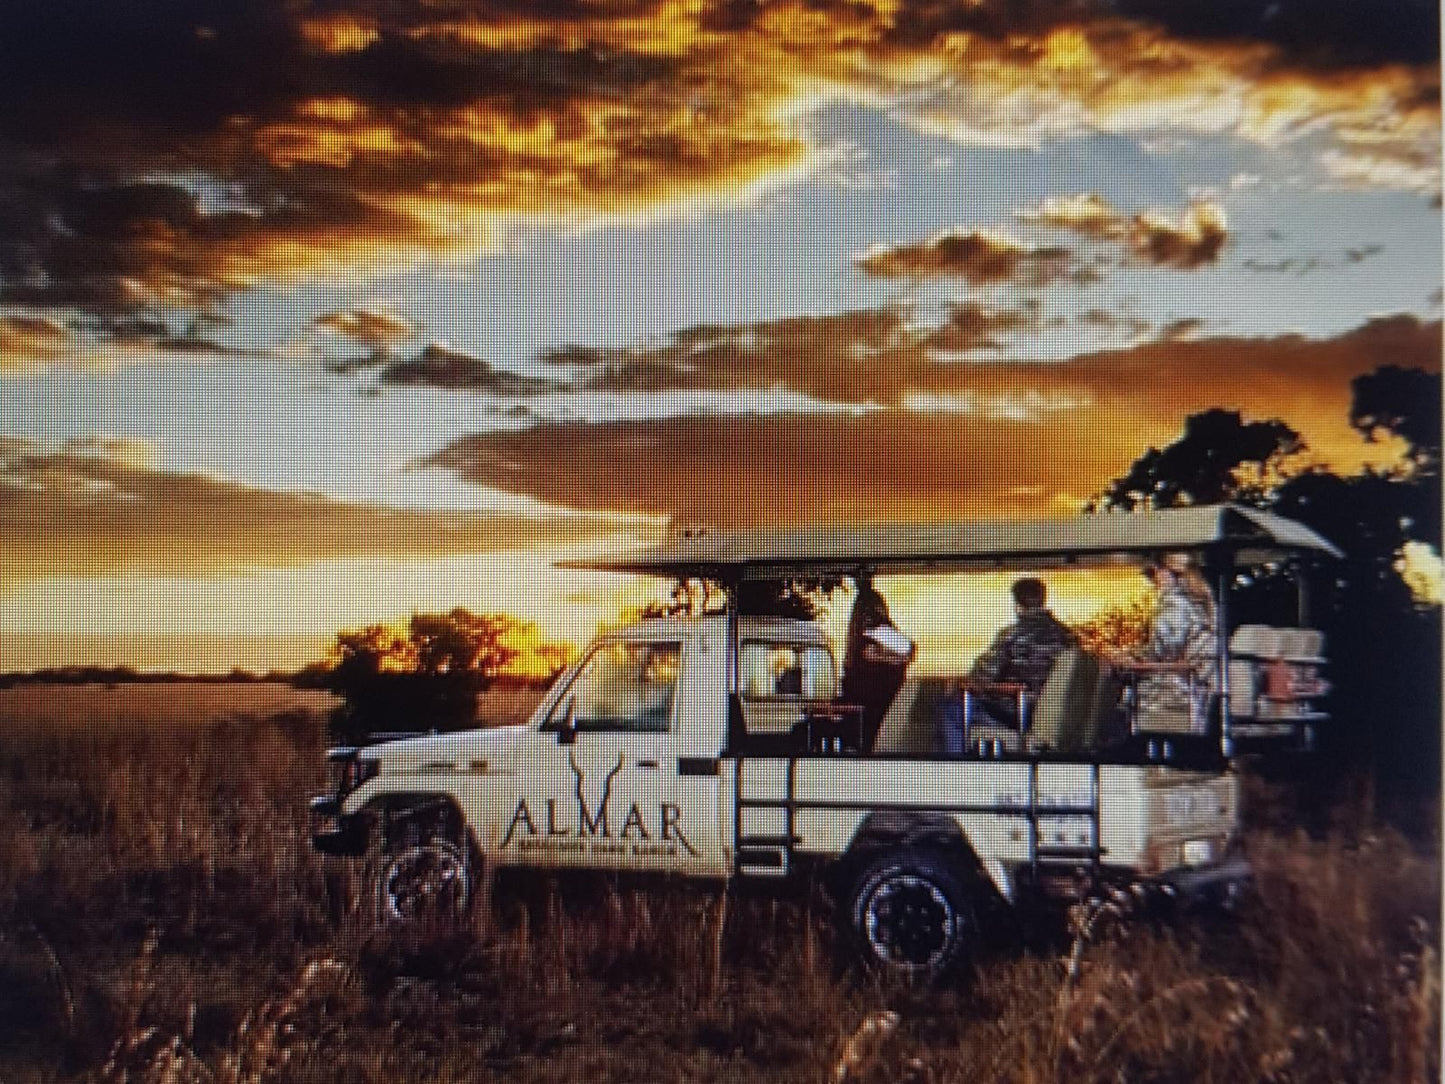 Almar Exclusive Game Ranch Bloemhof North West Province South Africa Lowland, Nature, Sunset, Sky, Vehicle